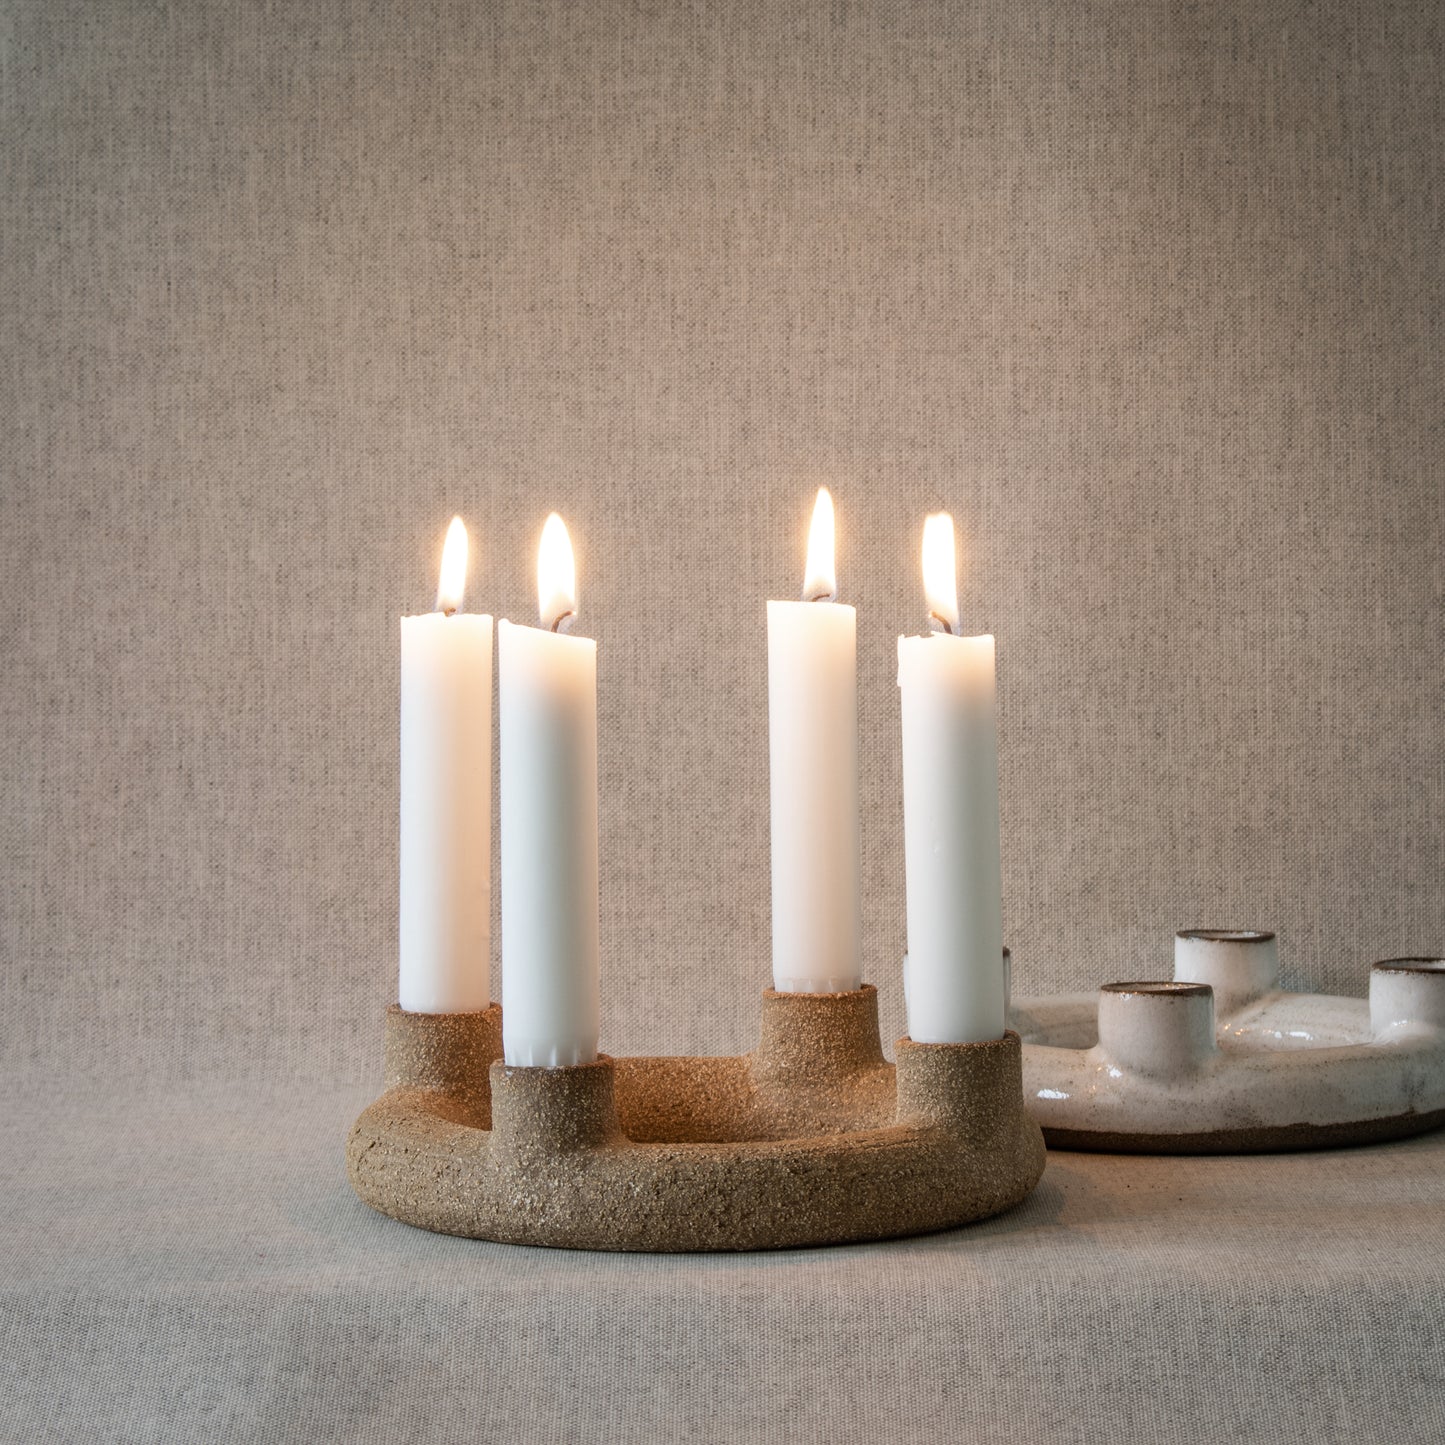 Candlestick Ring, 4 candles - Advent candlestick